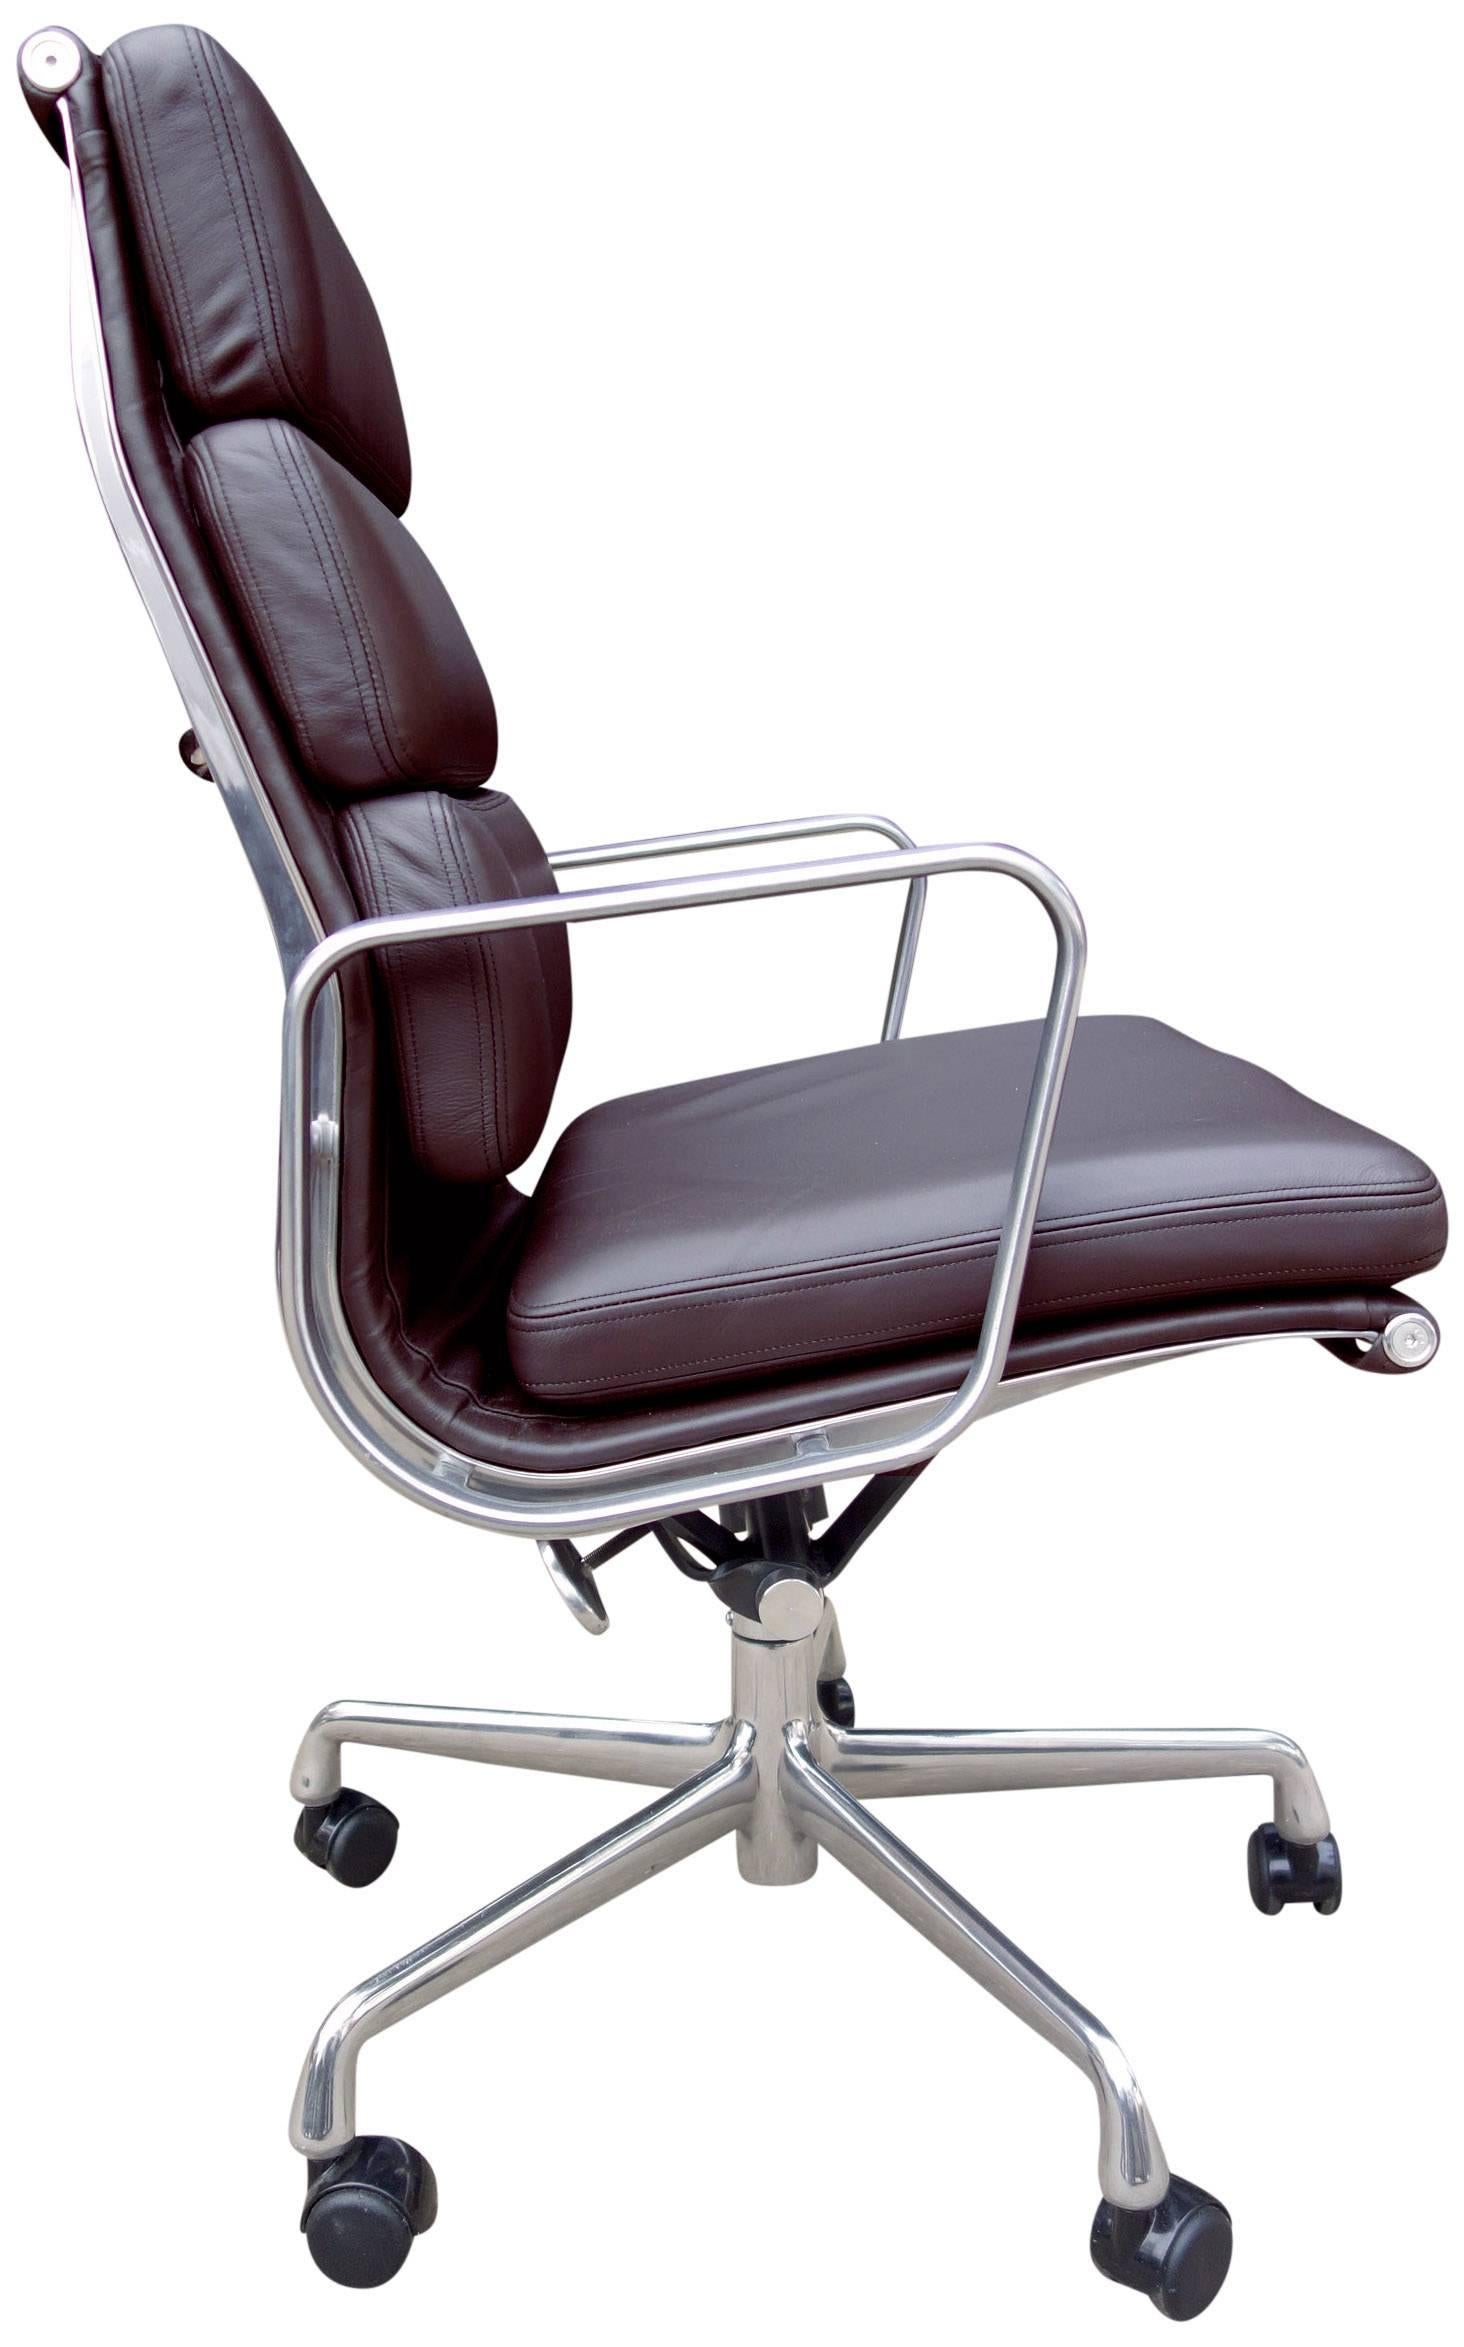 For your consideration is an Eames for Herman Miller vintage soft pad chair ( High Back) in a dark chocolate brown.

This authentic vintage example is an icon of Mid-Century Modern design. This chair is part of the Eames Aluminum group designed